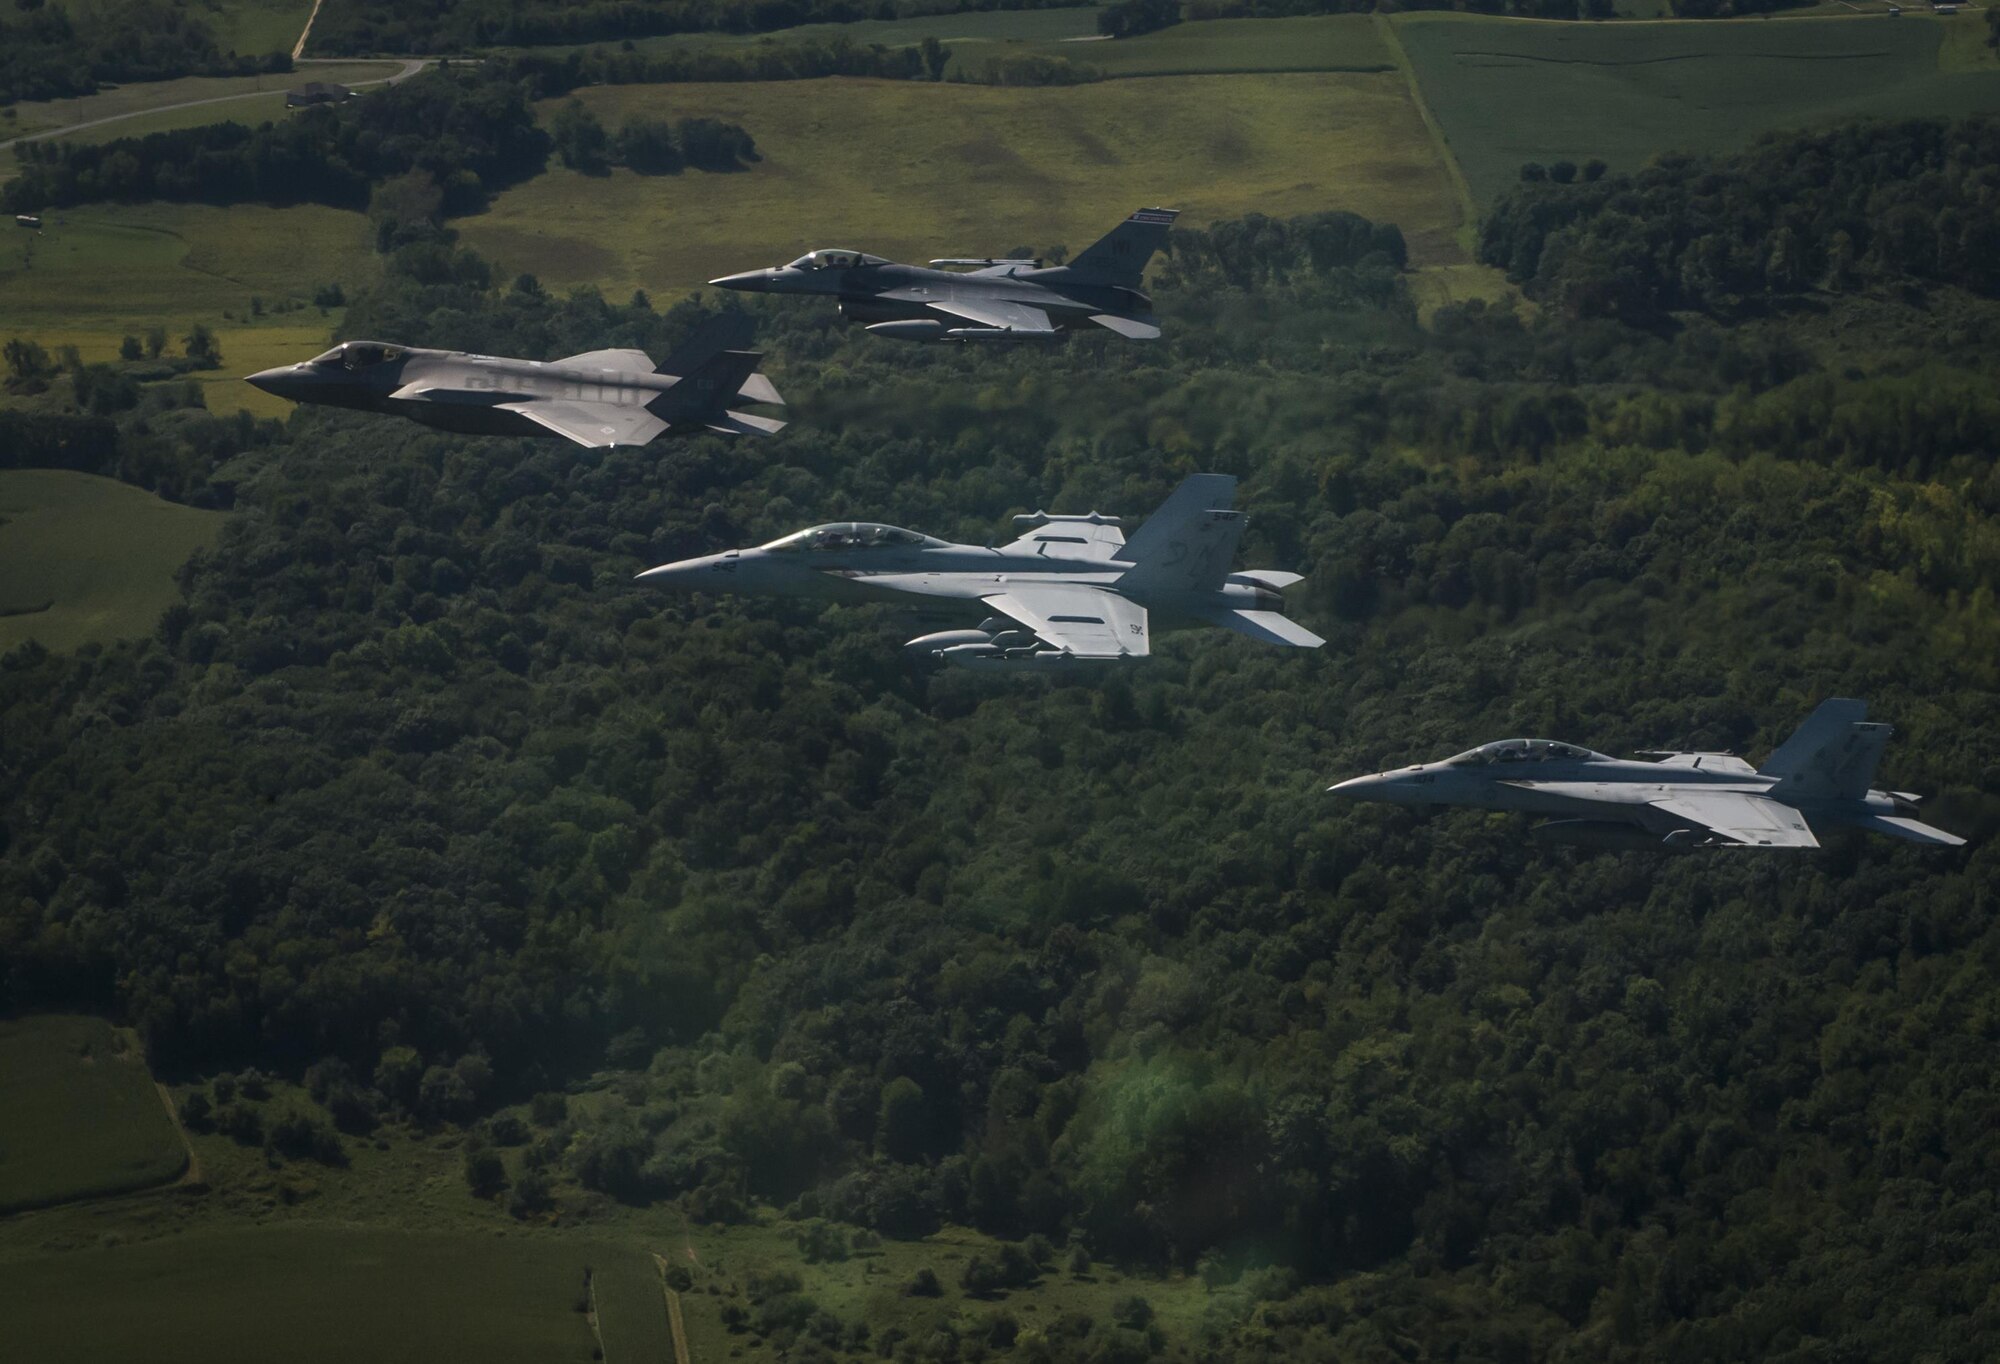 A U.S. Air Force F-35A Lighting II, F-16C Fighting Falcon and a U.S. Navy F/A-18F Super Hornet fly in formation during Exercise Northern Lighting Aug. 31, 2016. Northern Lightning is a tactical-level, joint training exercise that emphasizes fifth and fourth generation assets engaged in a contested, degraded environment. (U.S. Air Force photo/Staff Sgt. DeAndre Curtiss)
